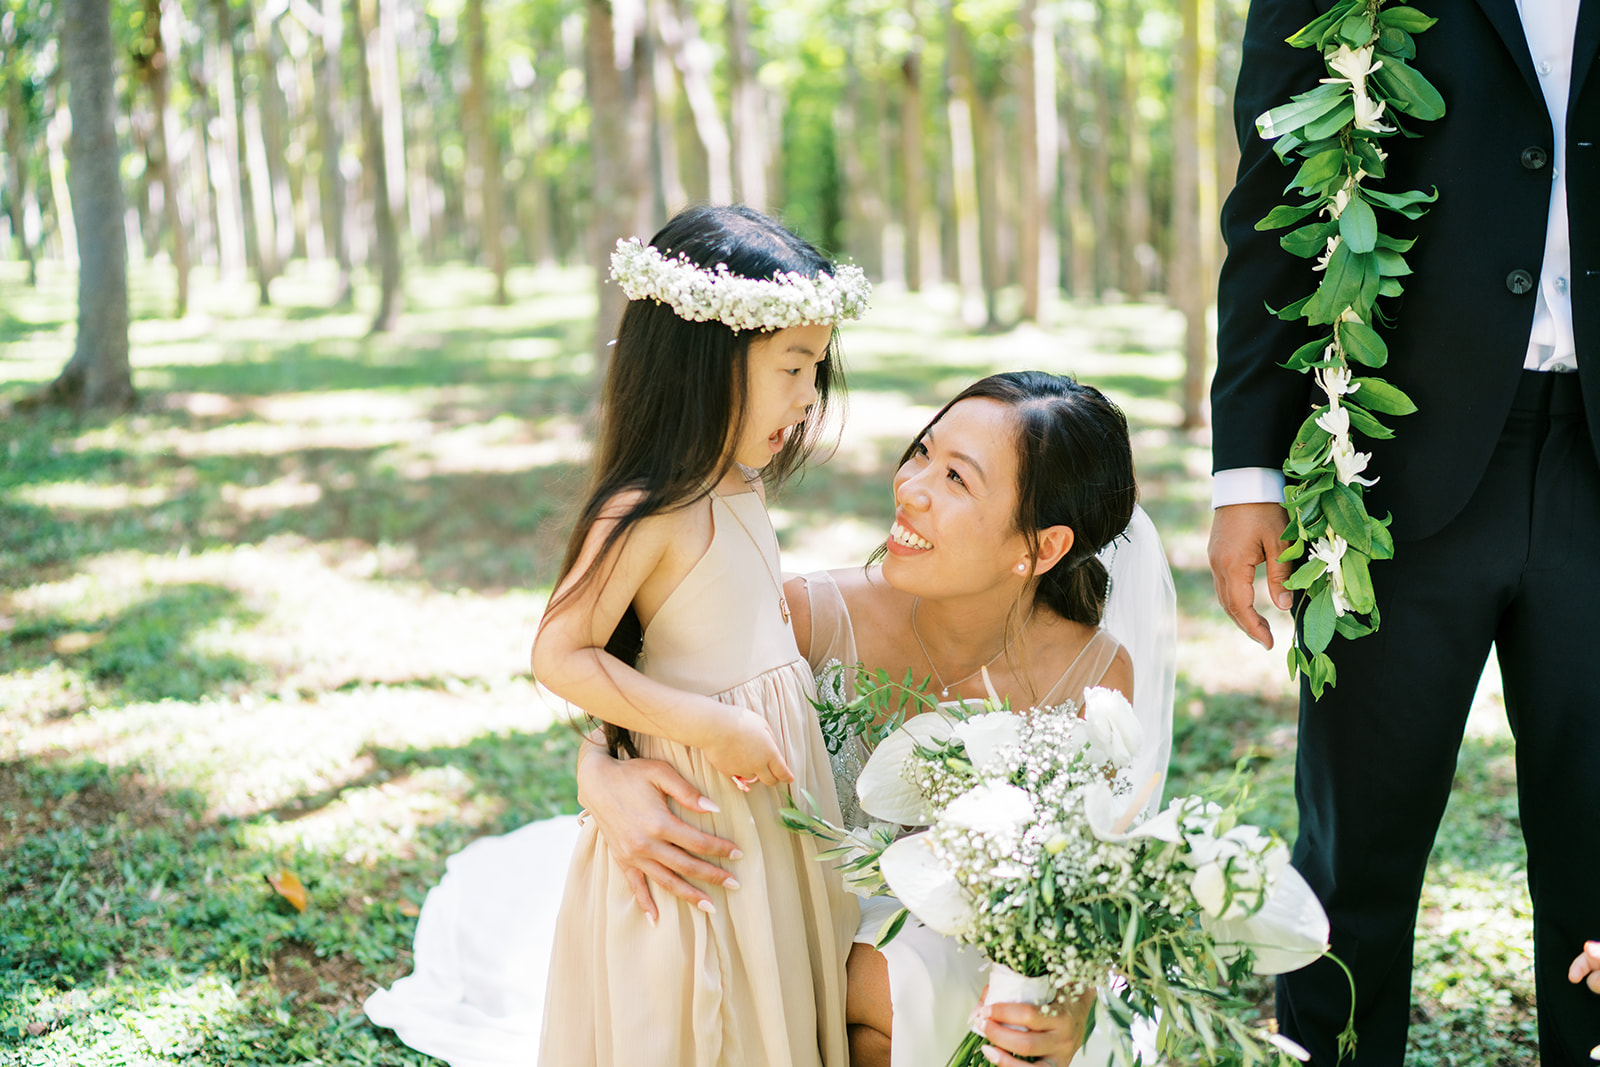 A bride smiles at a young flower girl while holding a bouquet, with a groom partially visible to the right.